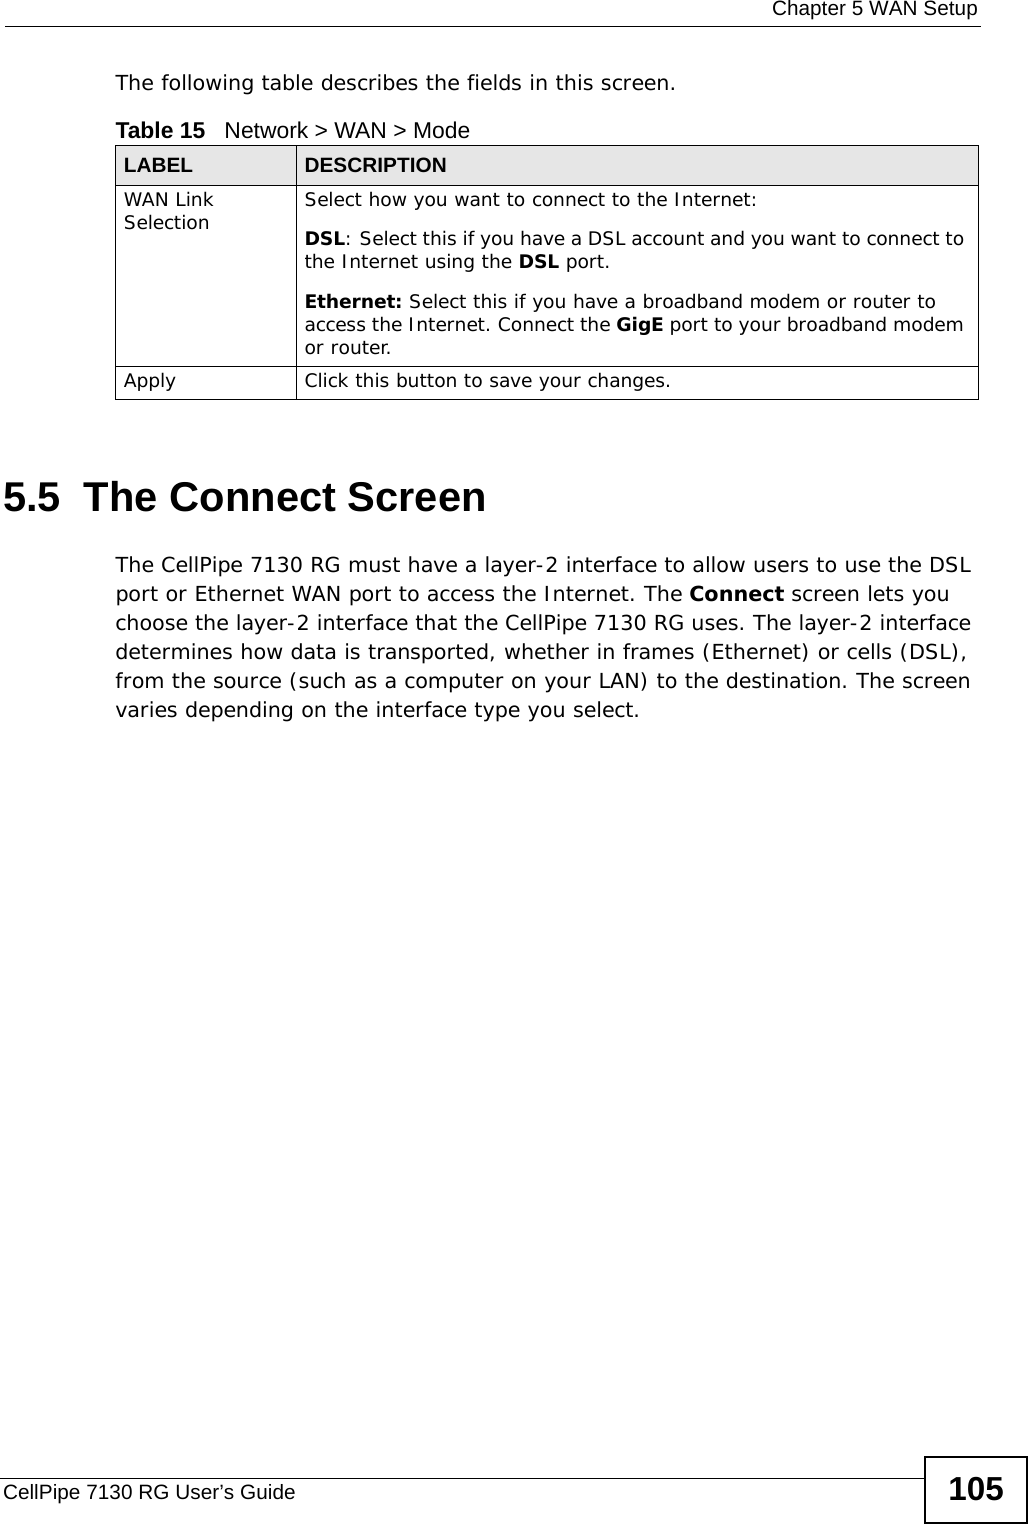  Chapter 5 WAN SetupCellPipe 7130 RG User’s Guide 105The following table describes the fields in this screen. 5.5  The Connect ScreenThe CellPipe 7130 RG must have a layer-2 interface to allow users to use the DSL port or Ethernet WAN port to access the Internet. The Connect screen lets you choose the layer-2 interface that the CellPipe 7130 RG uses. The layer-2 interface determines how data is transported, whether in frames (Ethernet) or cells (DSL), from the source (such as a computer on your LAN) to the destination. The screen varies depending on the interface type you select.Table 15   Network &gt; WAN &gt; Mode LABEL DESCRIPTIONWAN Link Selection Select how you want to connect to the Internet:DSL: Select this if you have a DSL account and you want to connect to the Internet using the DSL port.Ethernet: Select this if you have a broadband modem or router to access the Internet. Connect the GigE port to your broadband modem or router.Apply Click this button to save your changes.